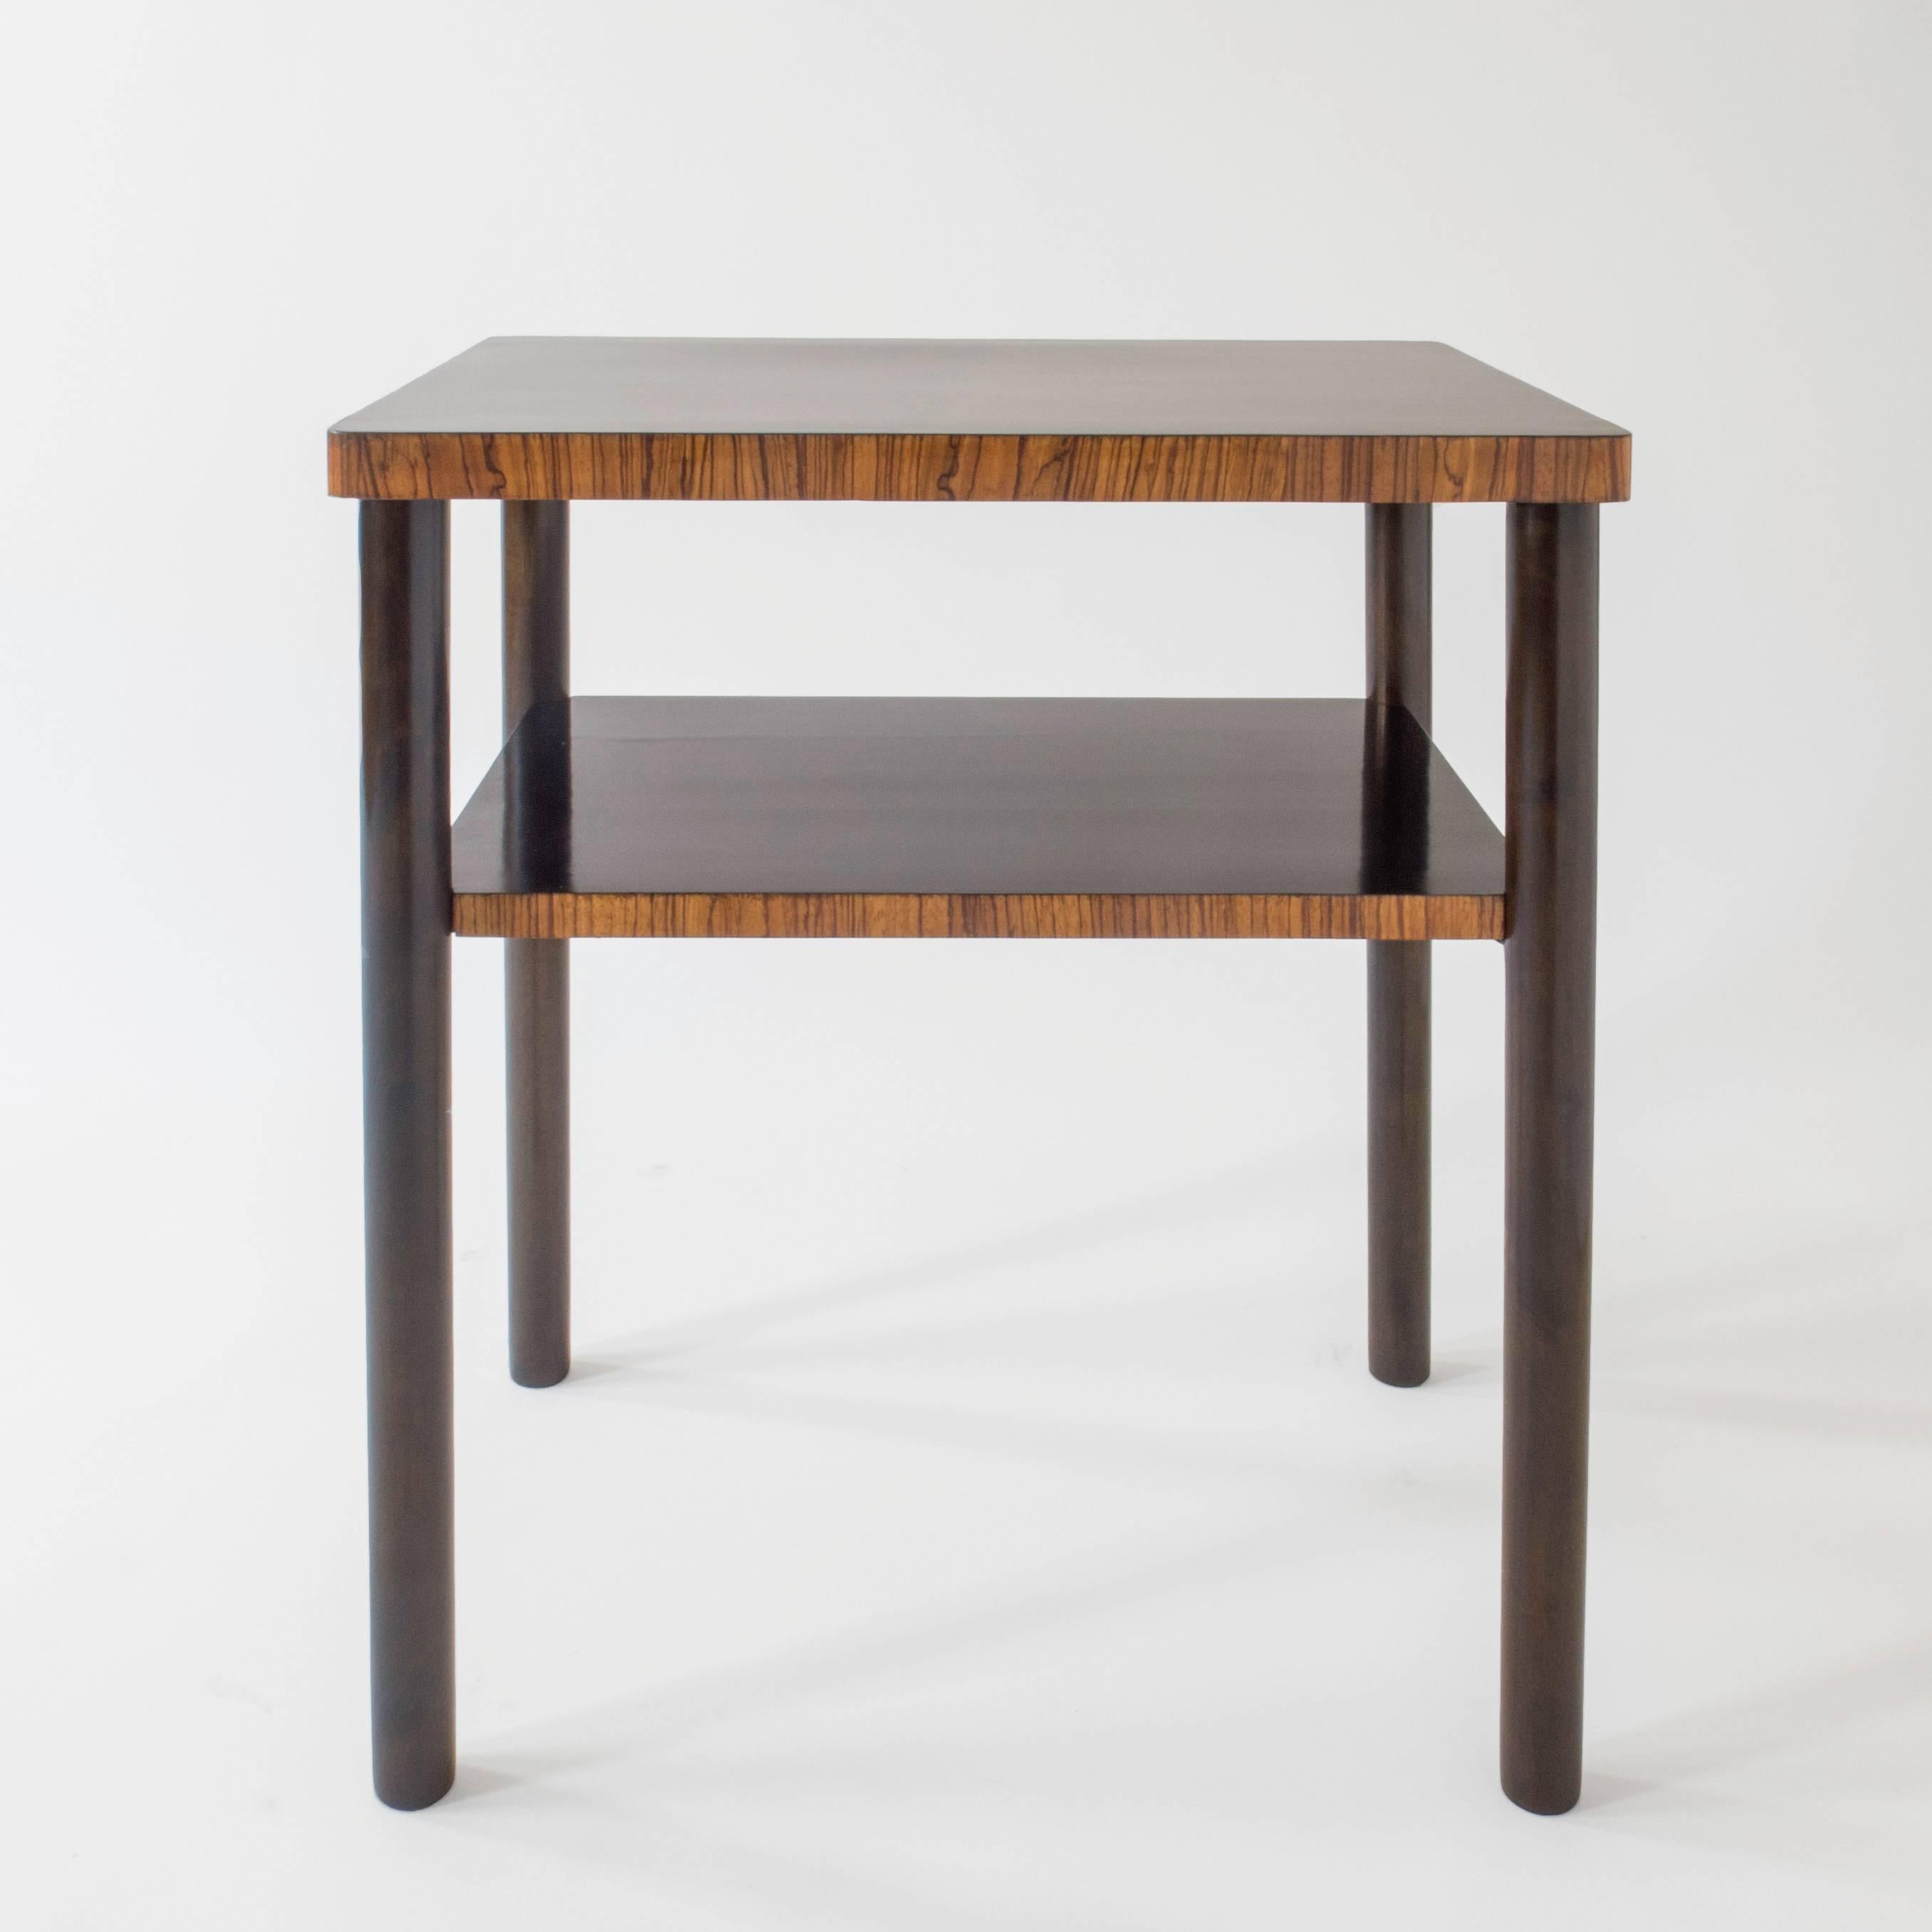 Mid-20th Century Complementary Pair of Swedish Early Modernist Zebrawood and Birch Side Tables For Sale